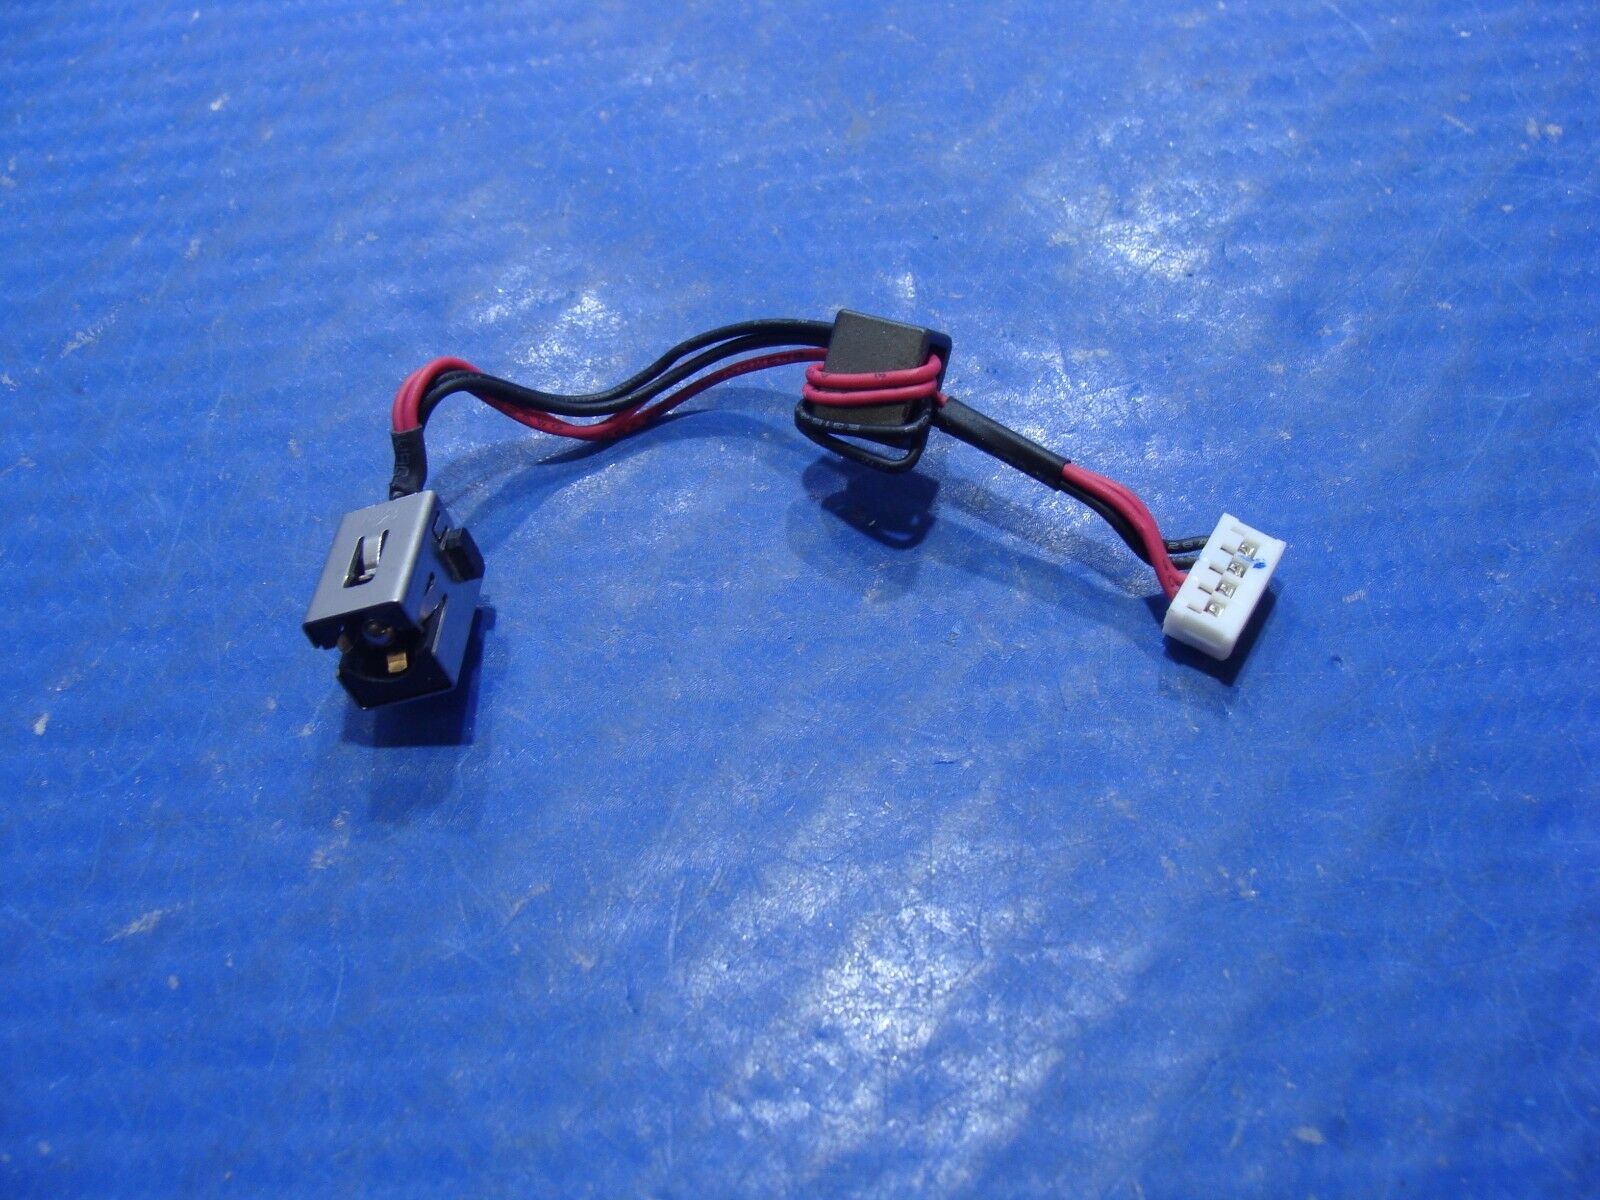 Toshiba Satellite C855D-S5110 15.6" OEM DC IN Power Jack with Cable 6017B0356001 Toshiba